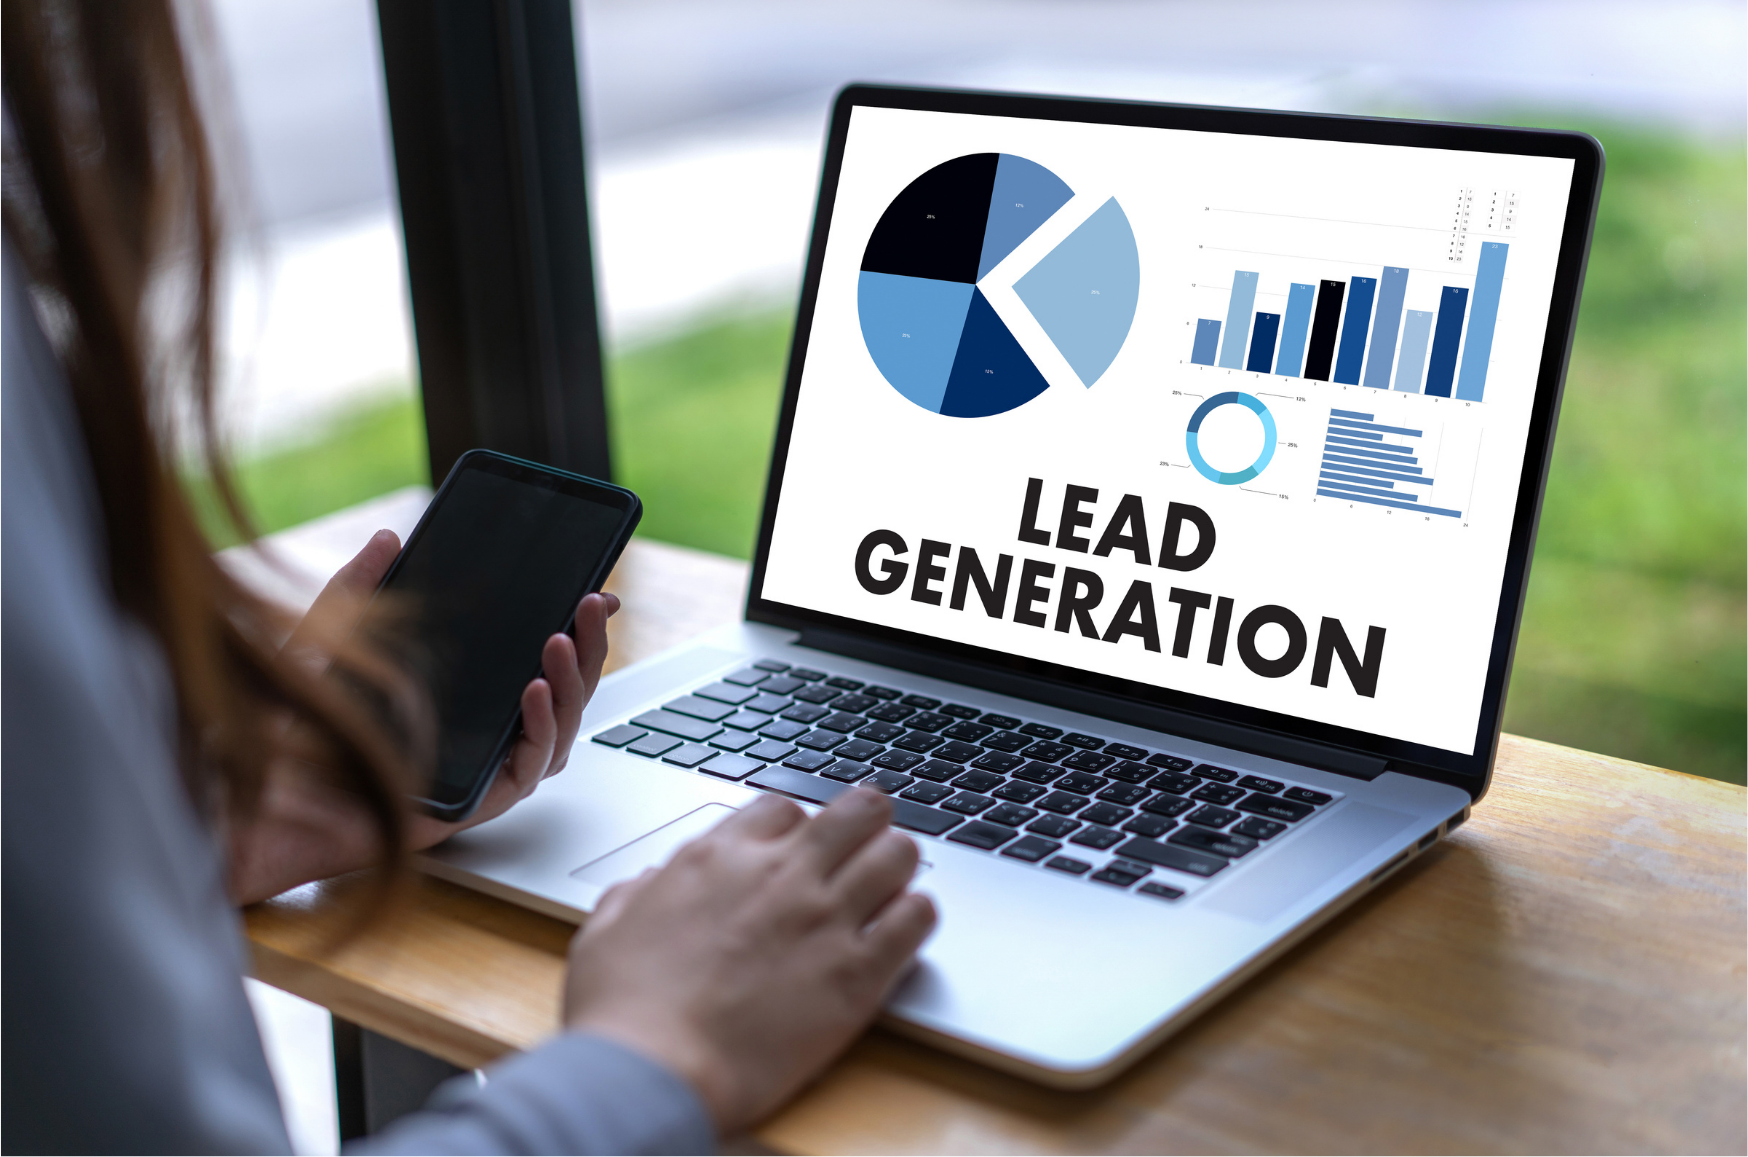 Lead Generation Tactics That Will Explode Your PR Campaign - Killer Lead Generation Tactics For Your PR Campaign